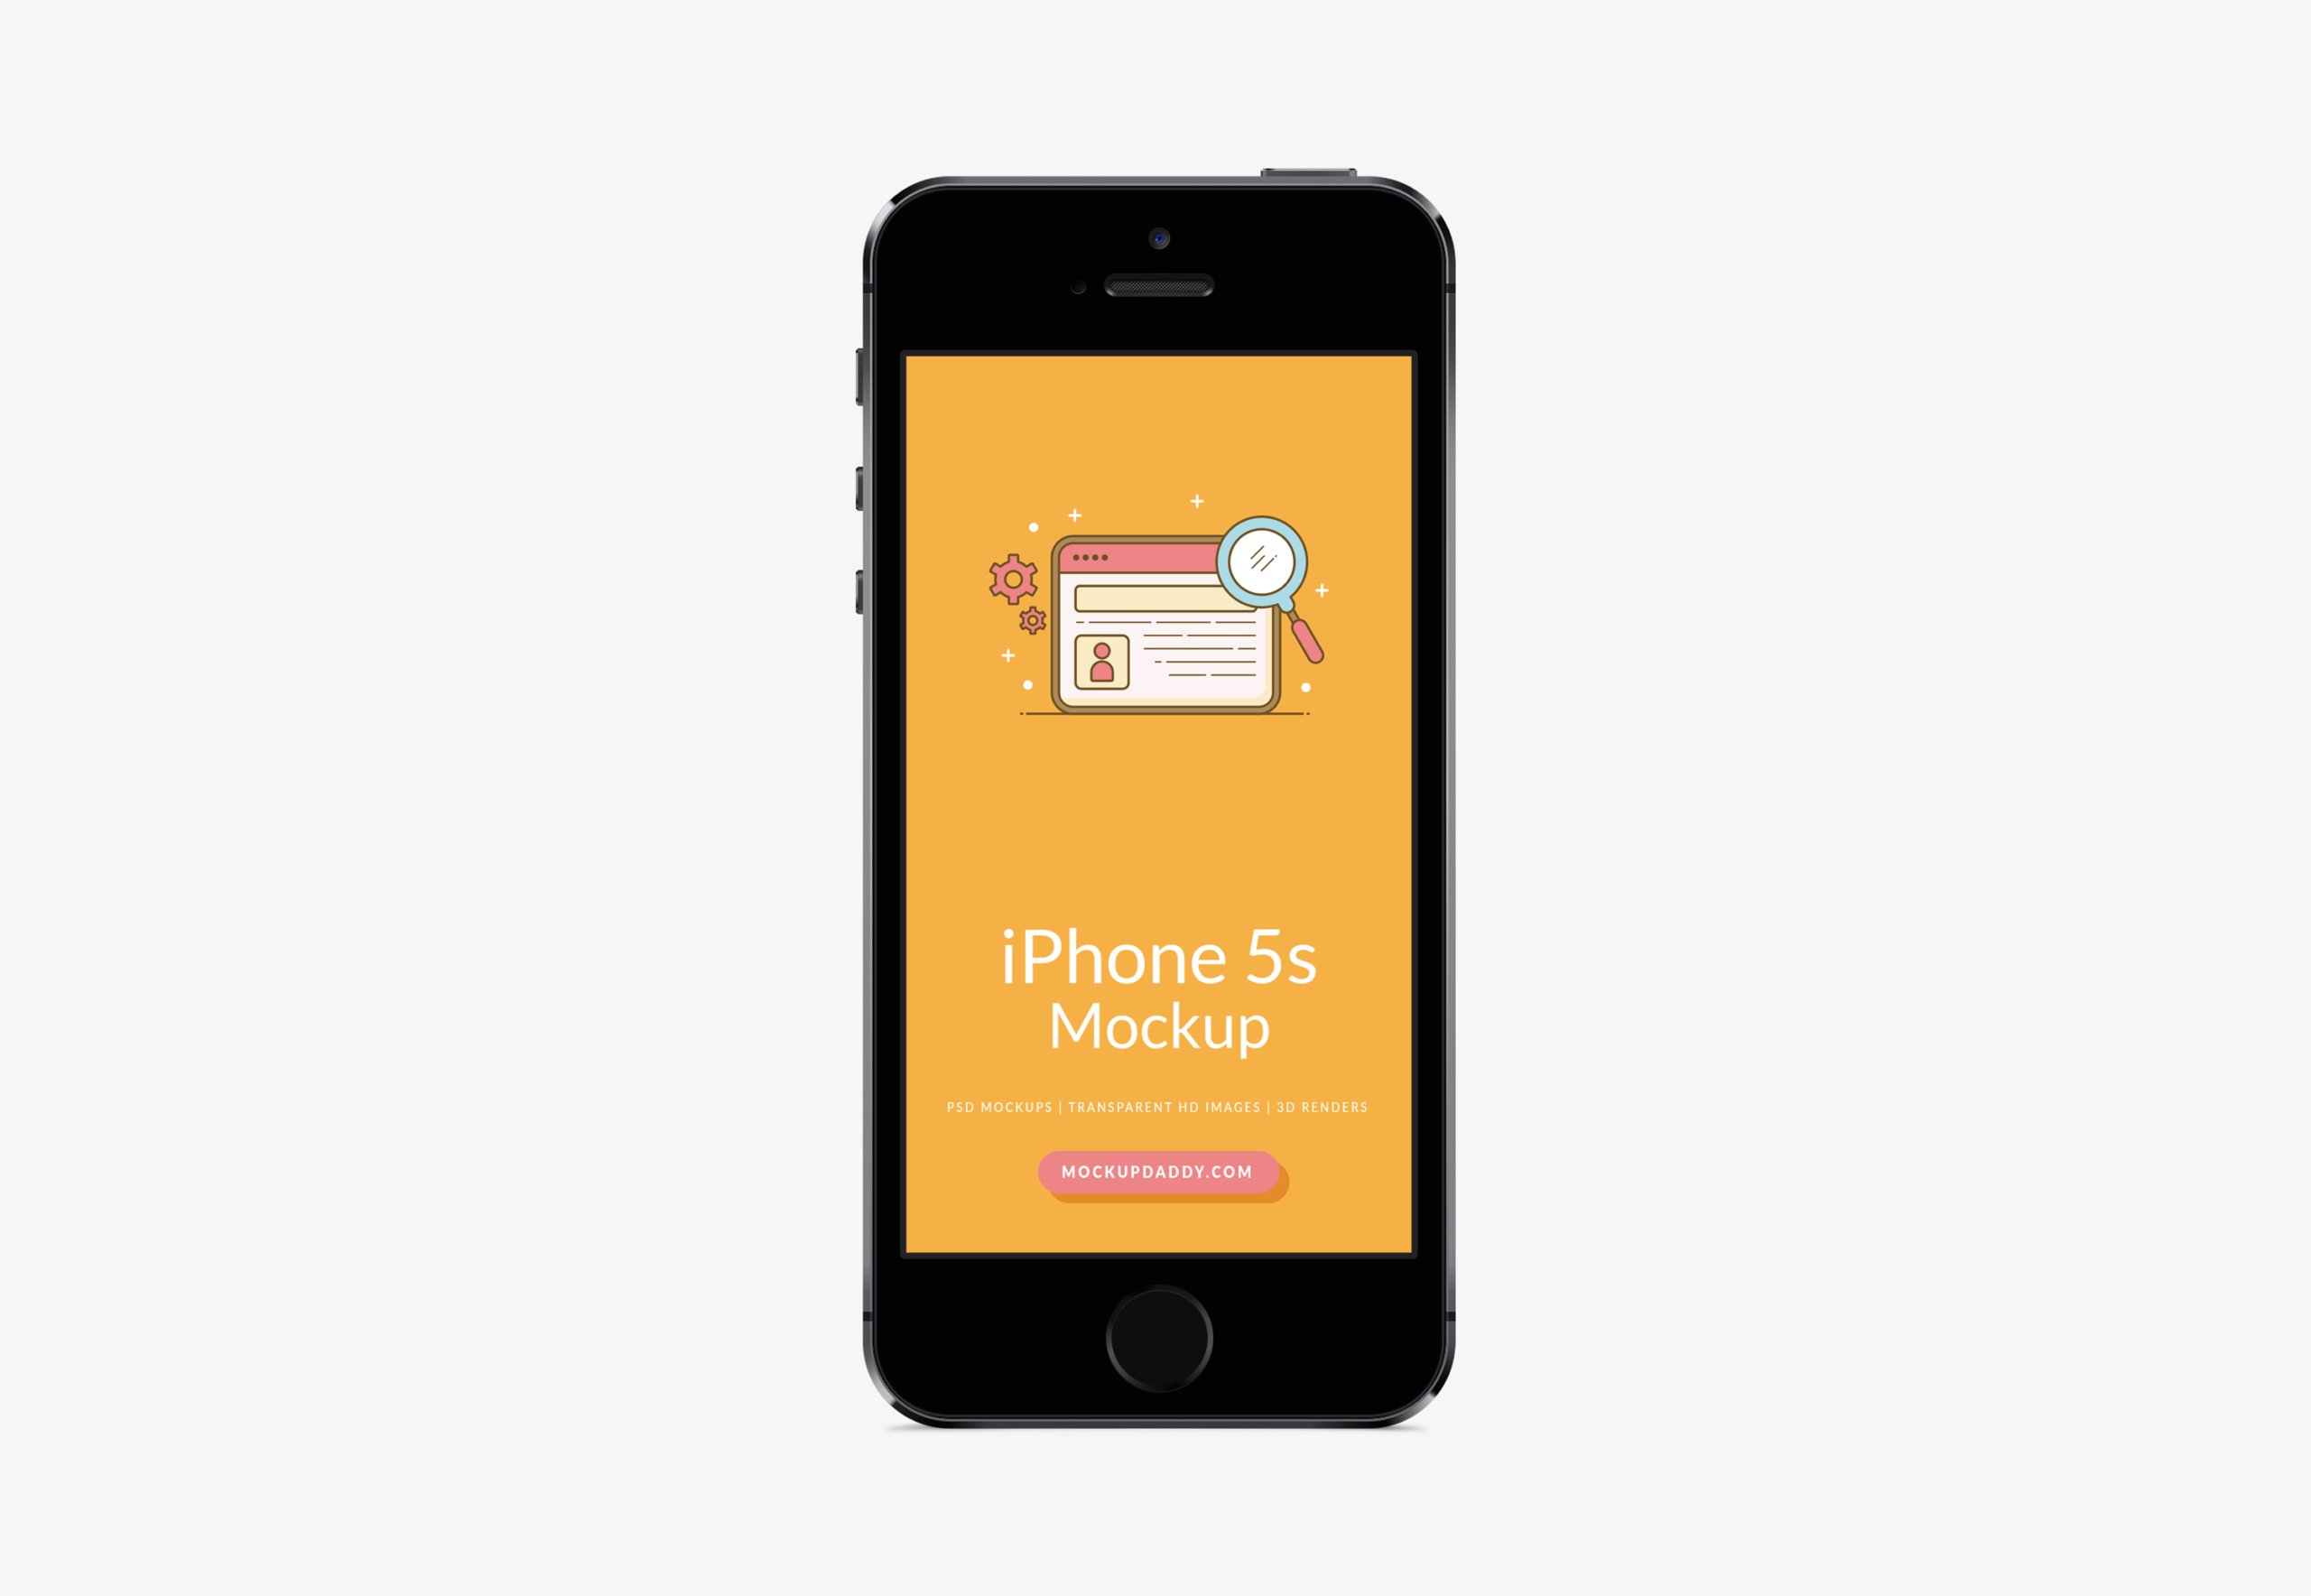 iPhone 5s Mockups cover image.